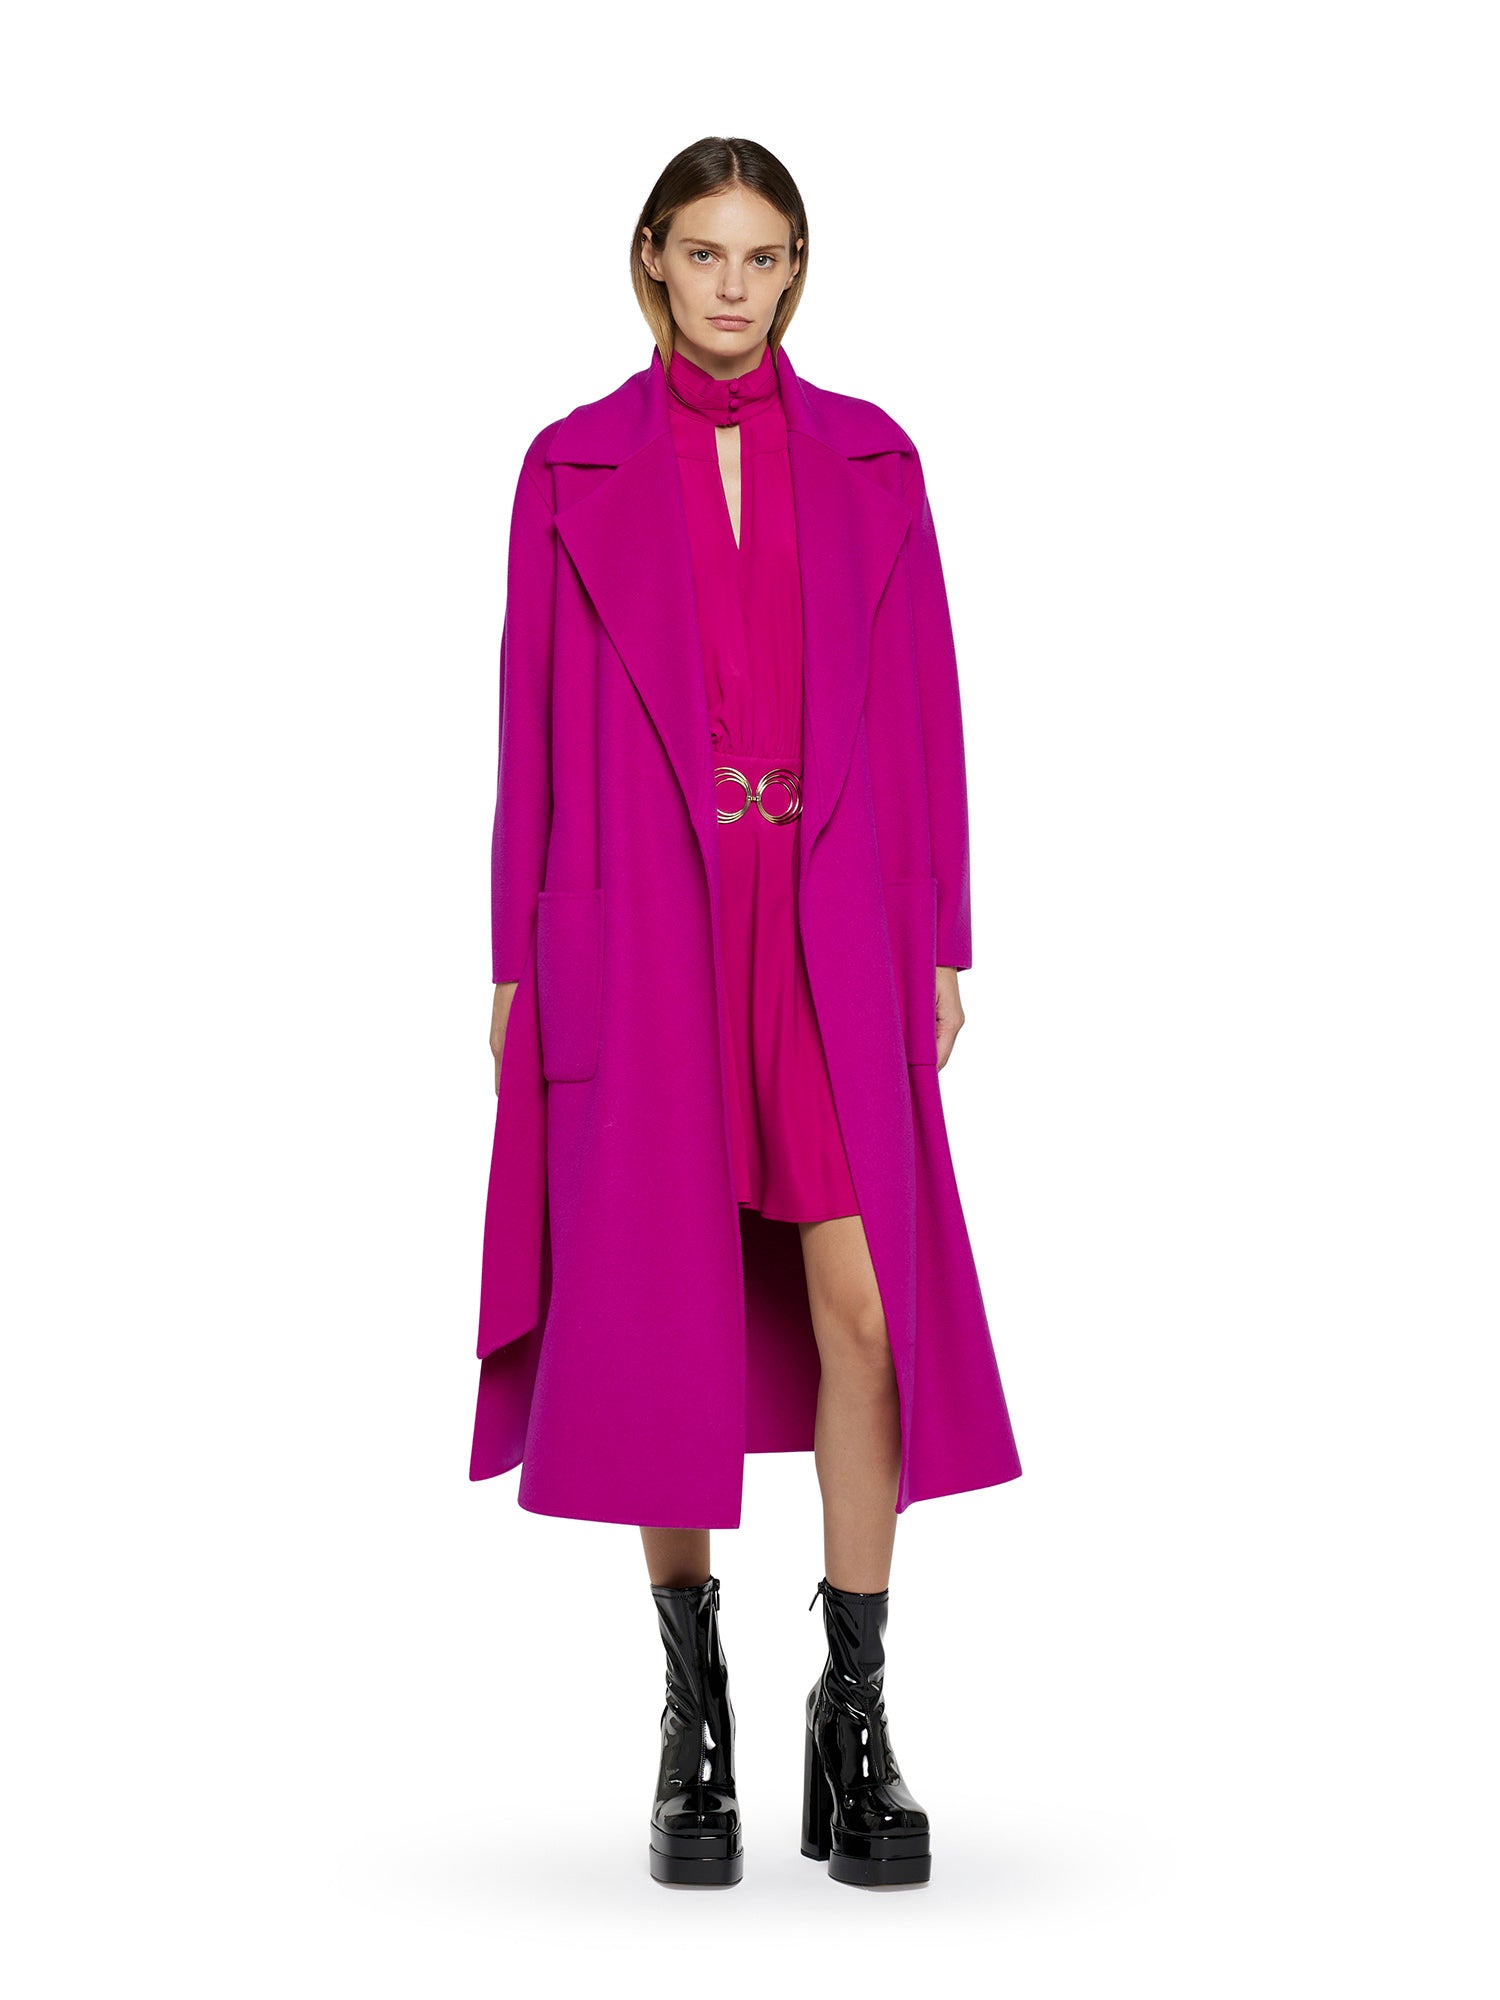 Double cloth dressing gown coat